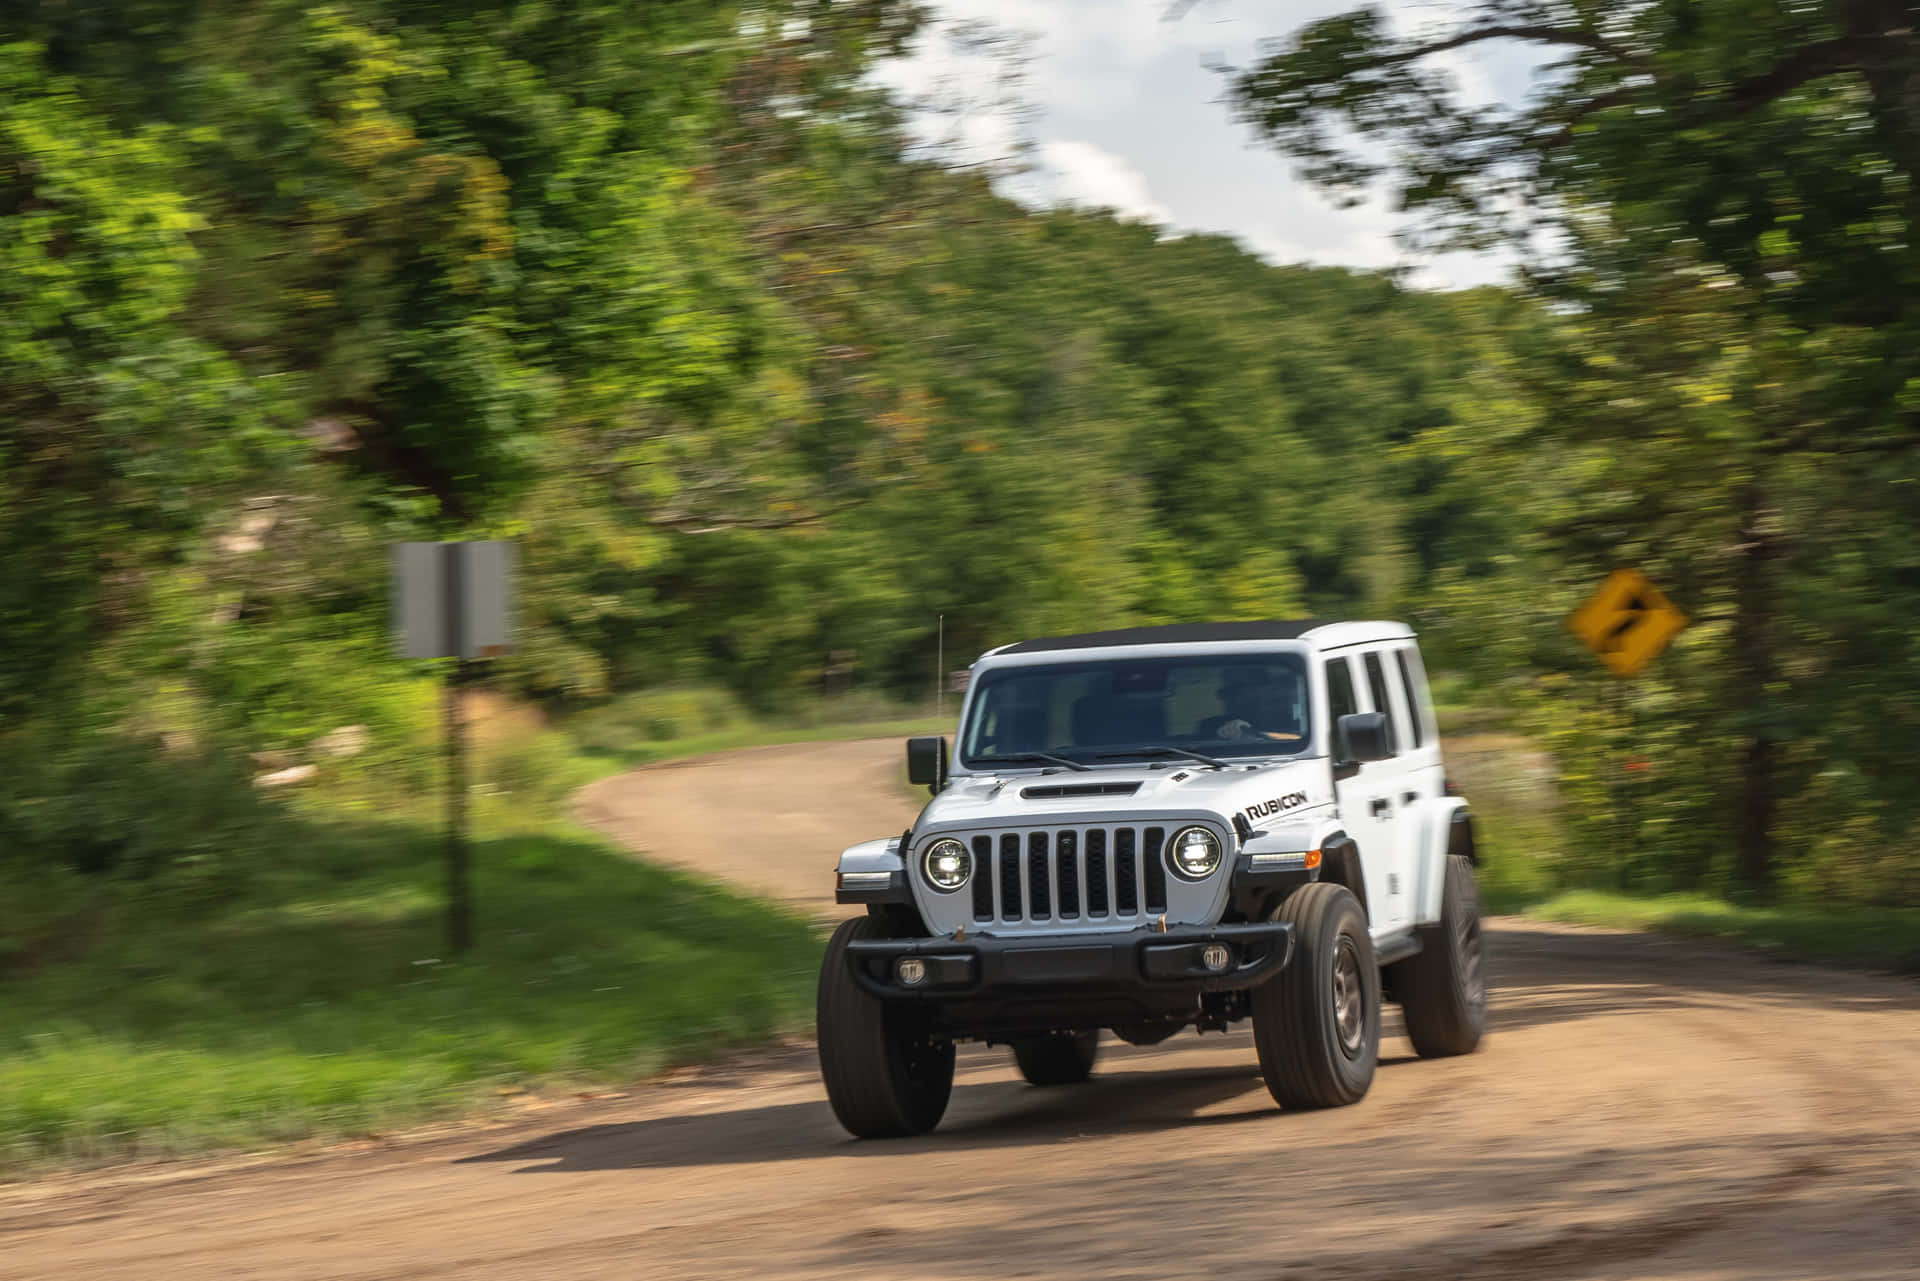 Conquer the outdoors with a dependable Jeep vehicle